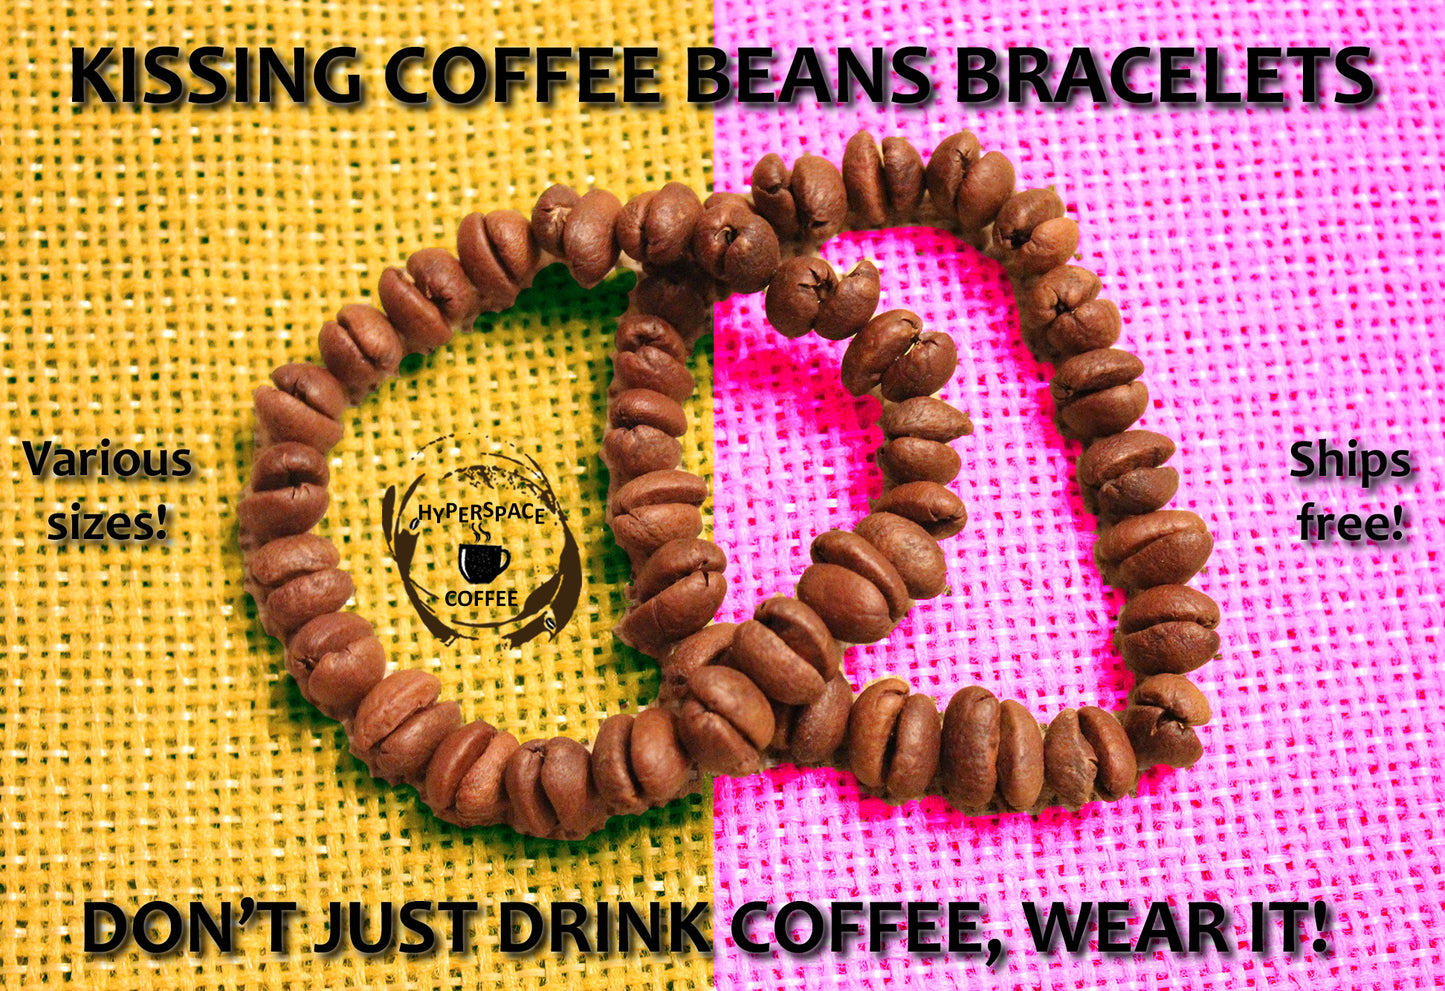 Hyperspace Coffee Bundle - Coffee Lovers  Coffee Bracelets Gift Set! Personalized Sizes